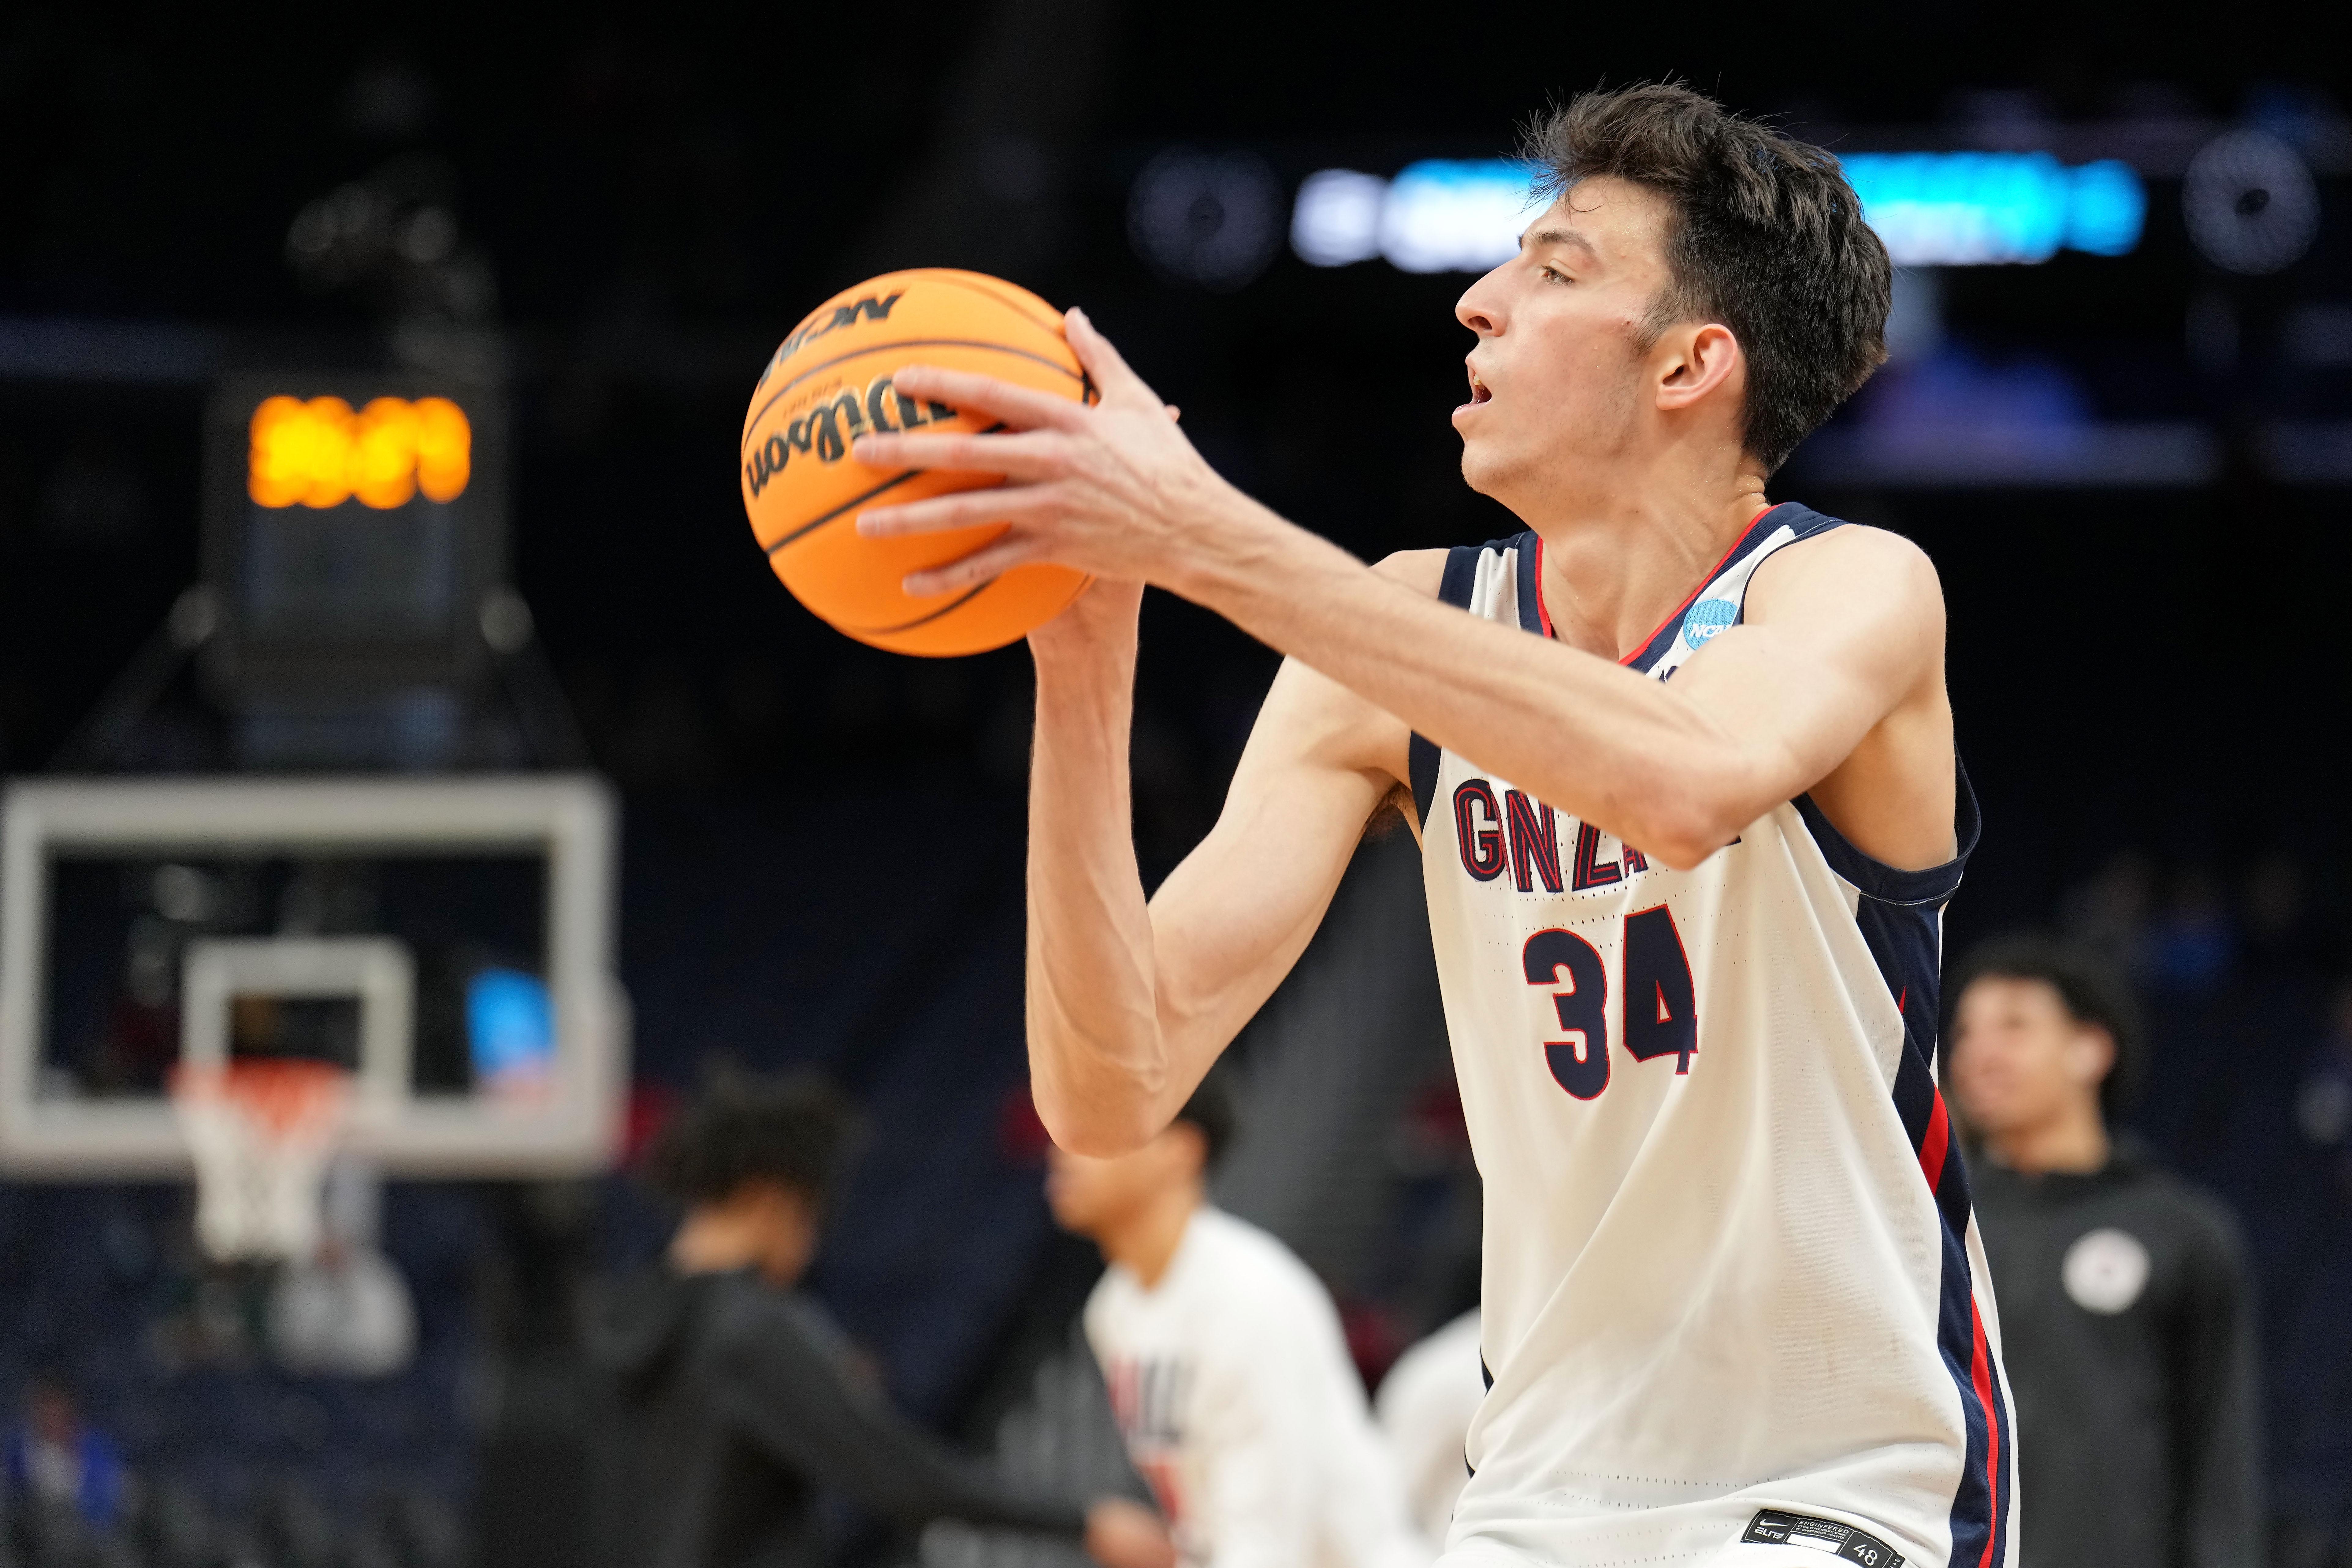 NBA Draft: Why Chet Holmgren's Slender Frame Raises Significant Medical Concerns for His Future in Pros